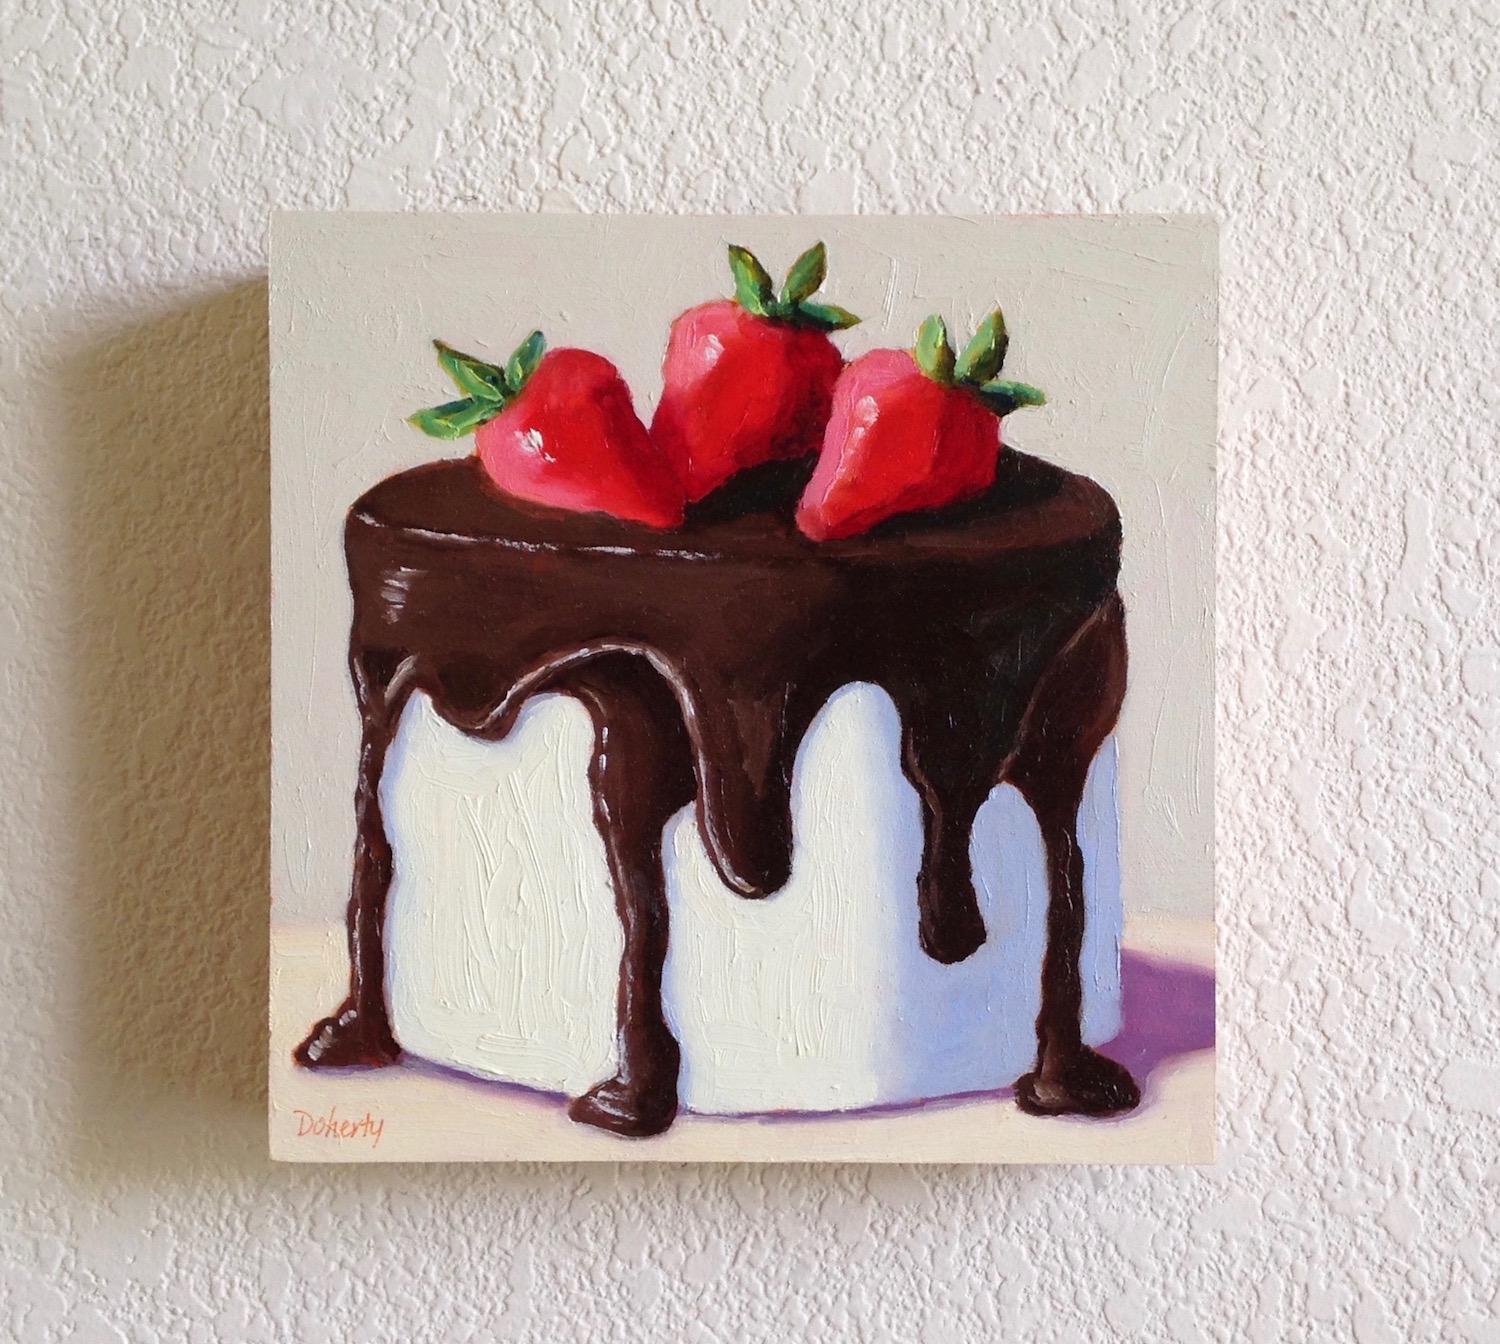 painting of a cake